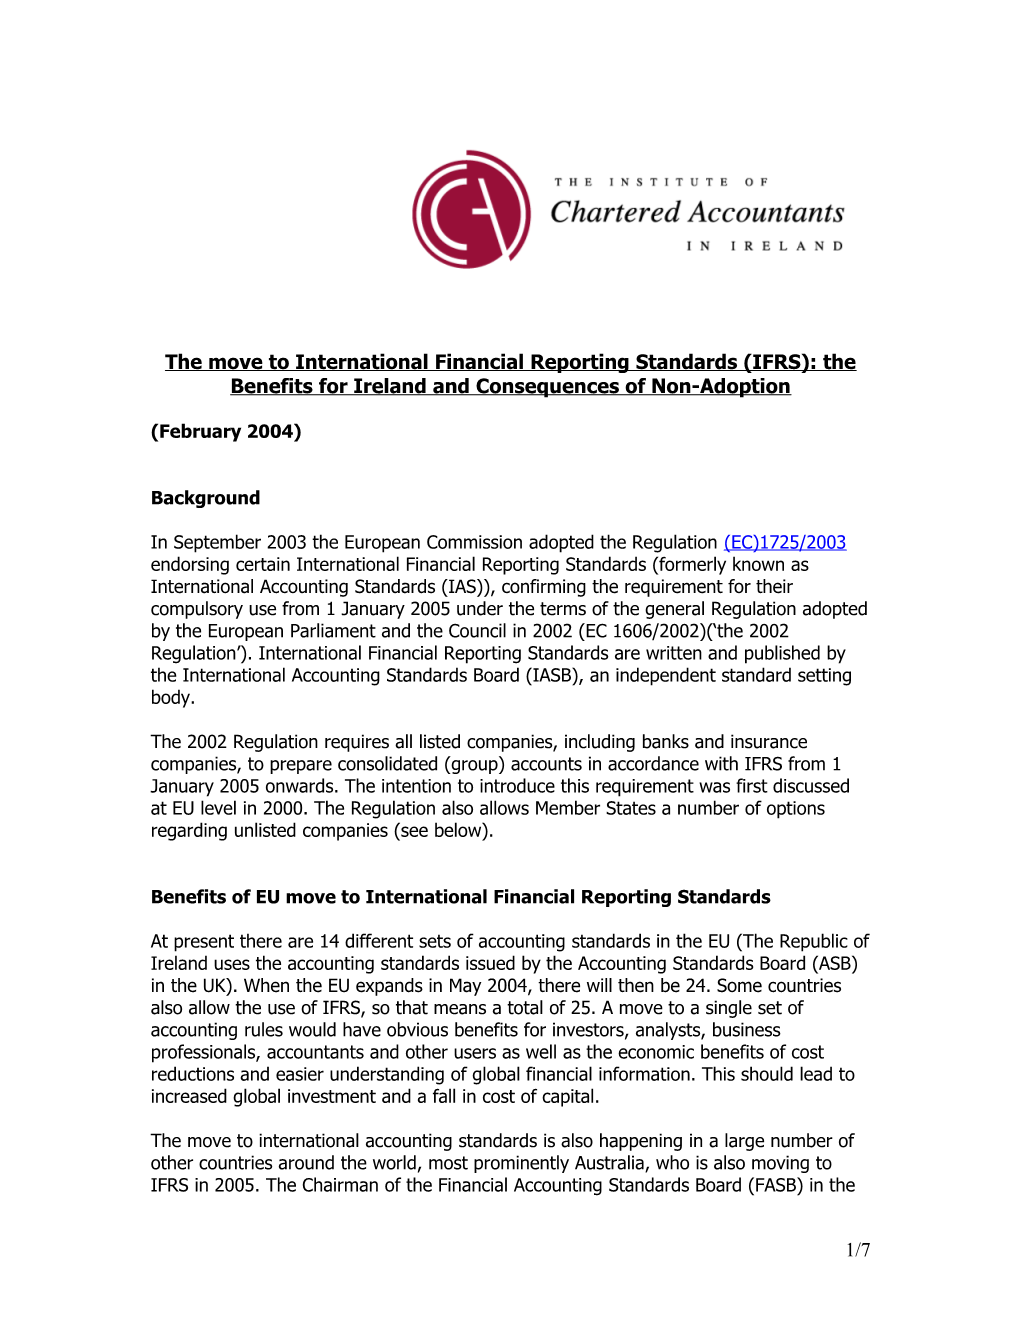 The Move to International Financial Reporting Standards (IFRS): the Benefits for Ireland